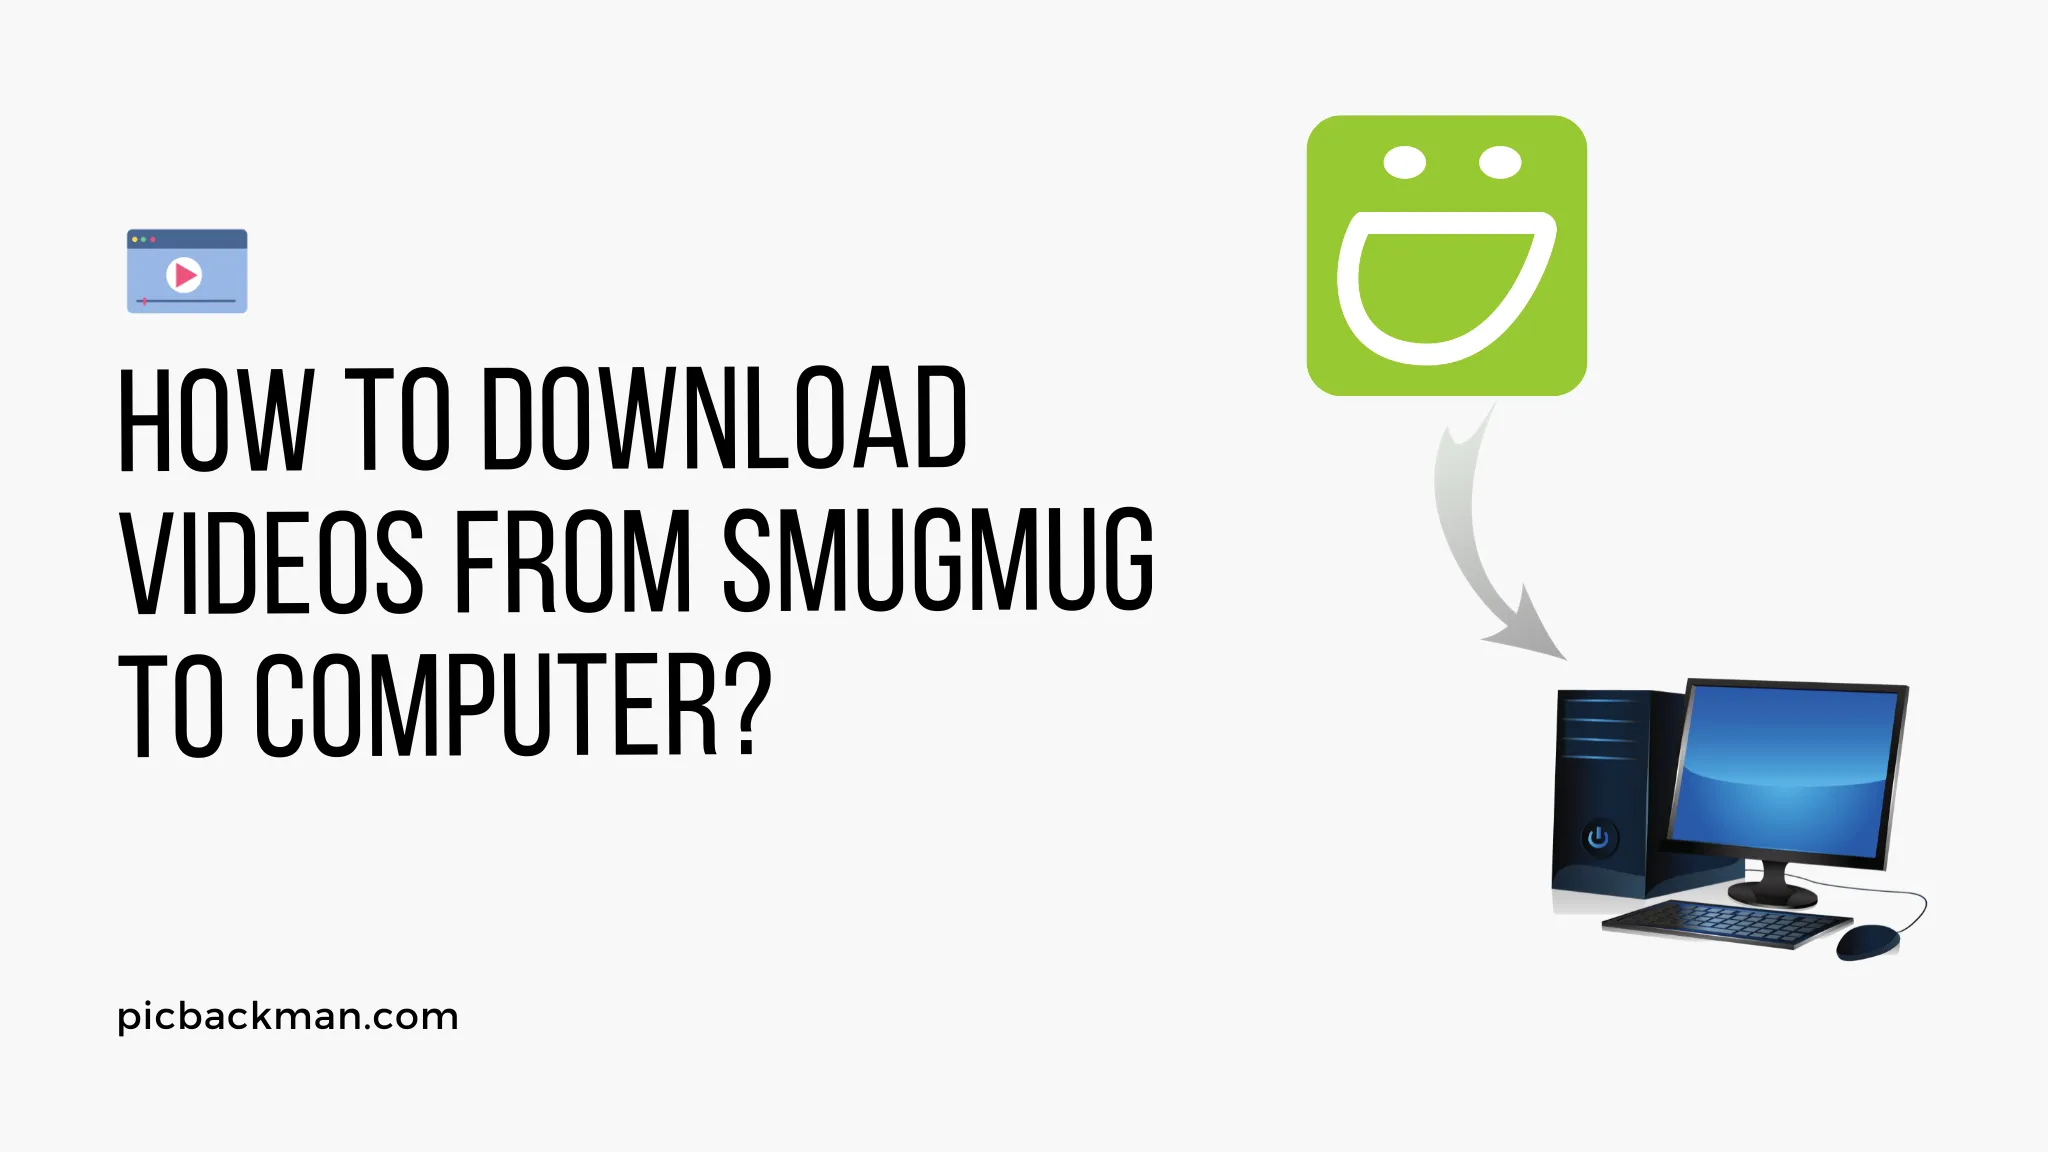 How to download videos from Smugmug to computer?